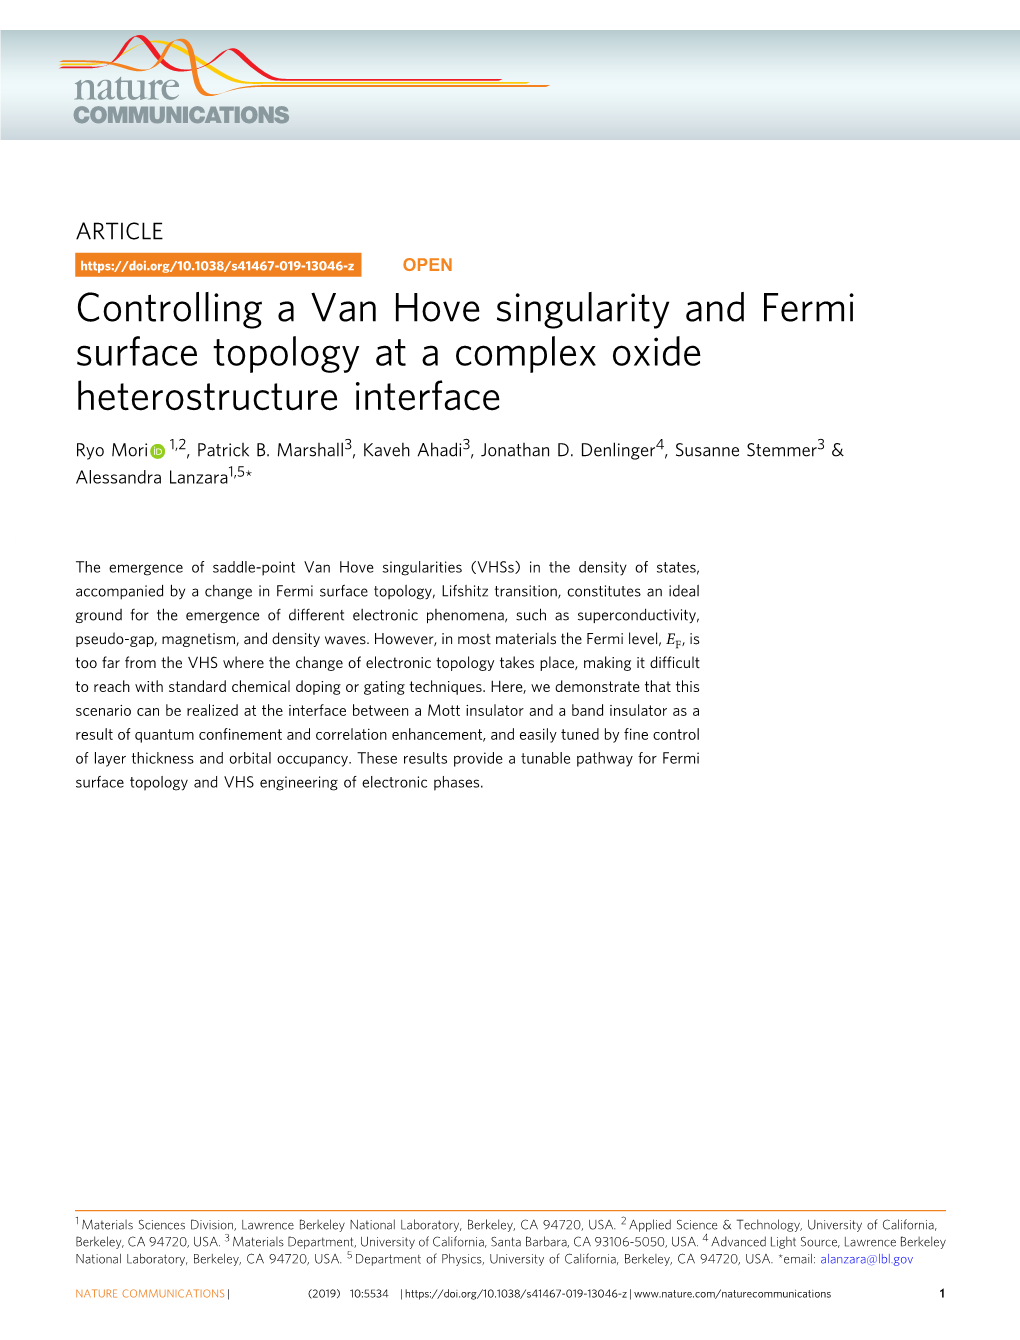 Controlling a Van Hove Singularity and Fermi Surface Topology at a Complex Oxide Heterostructure Interface